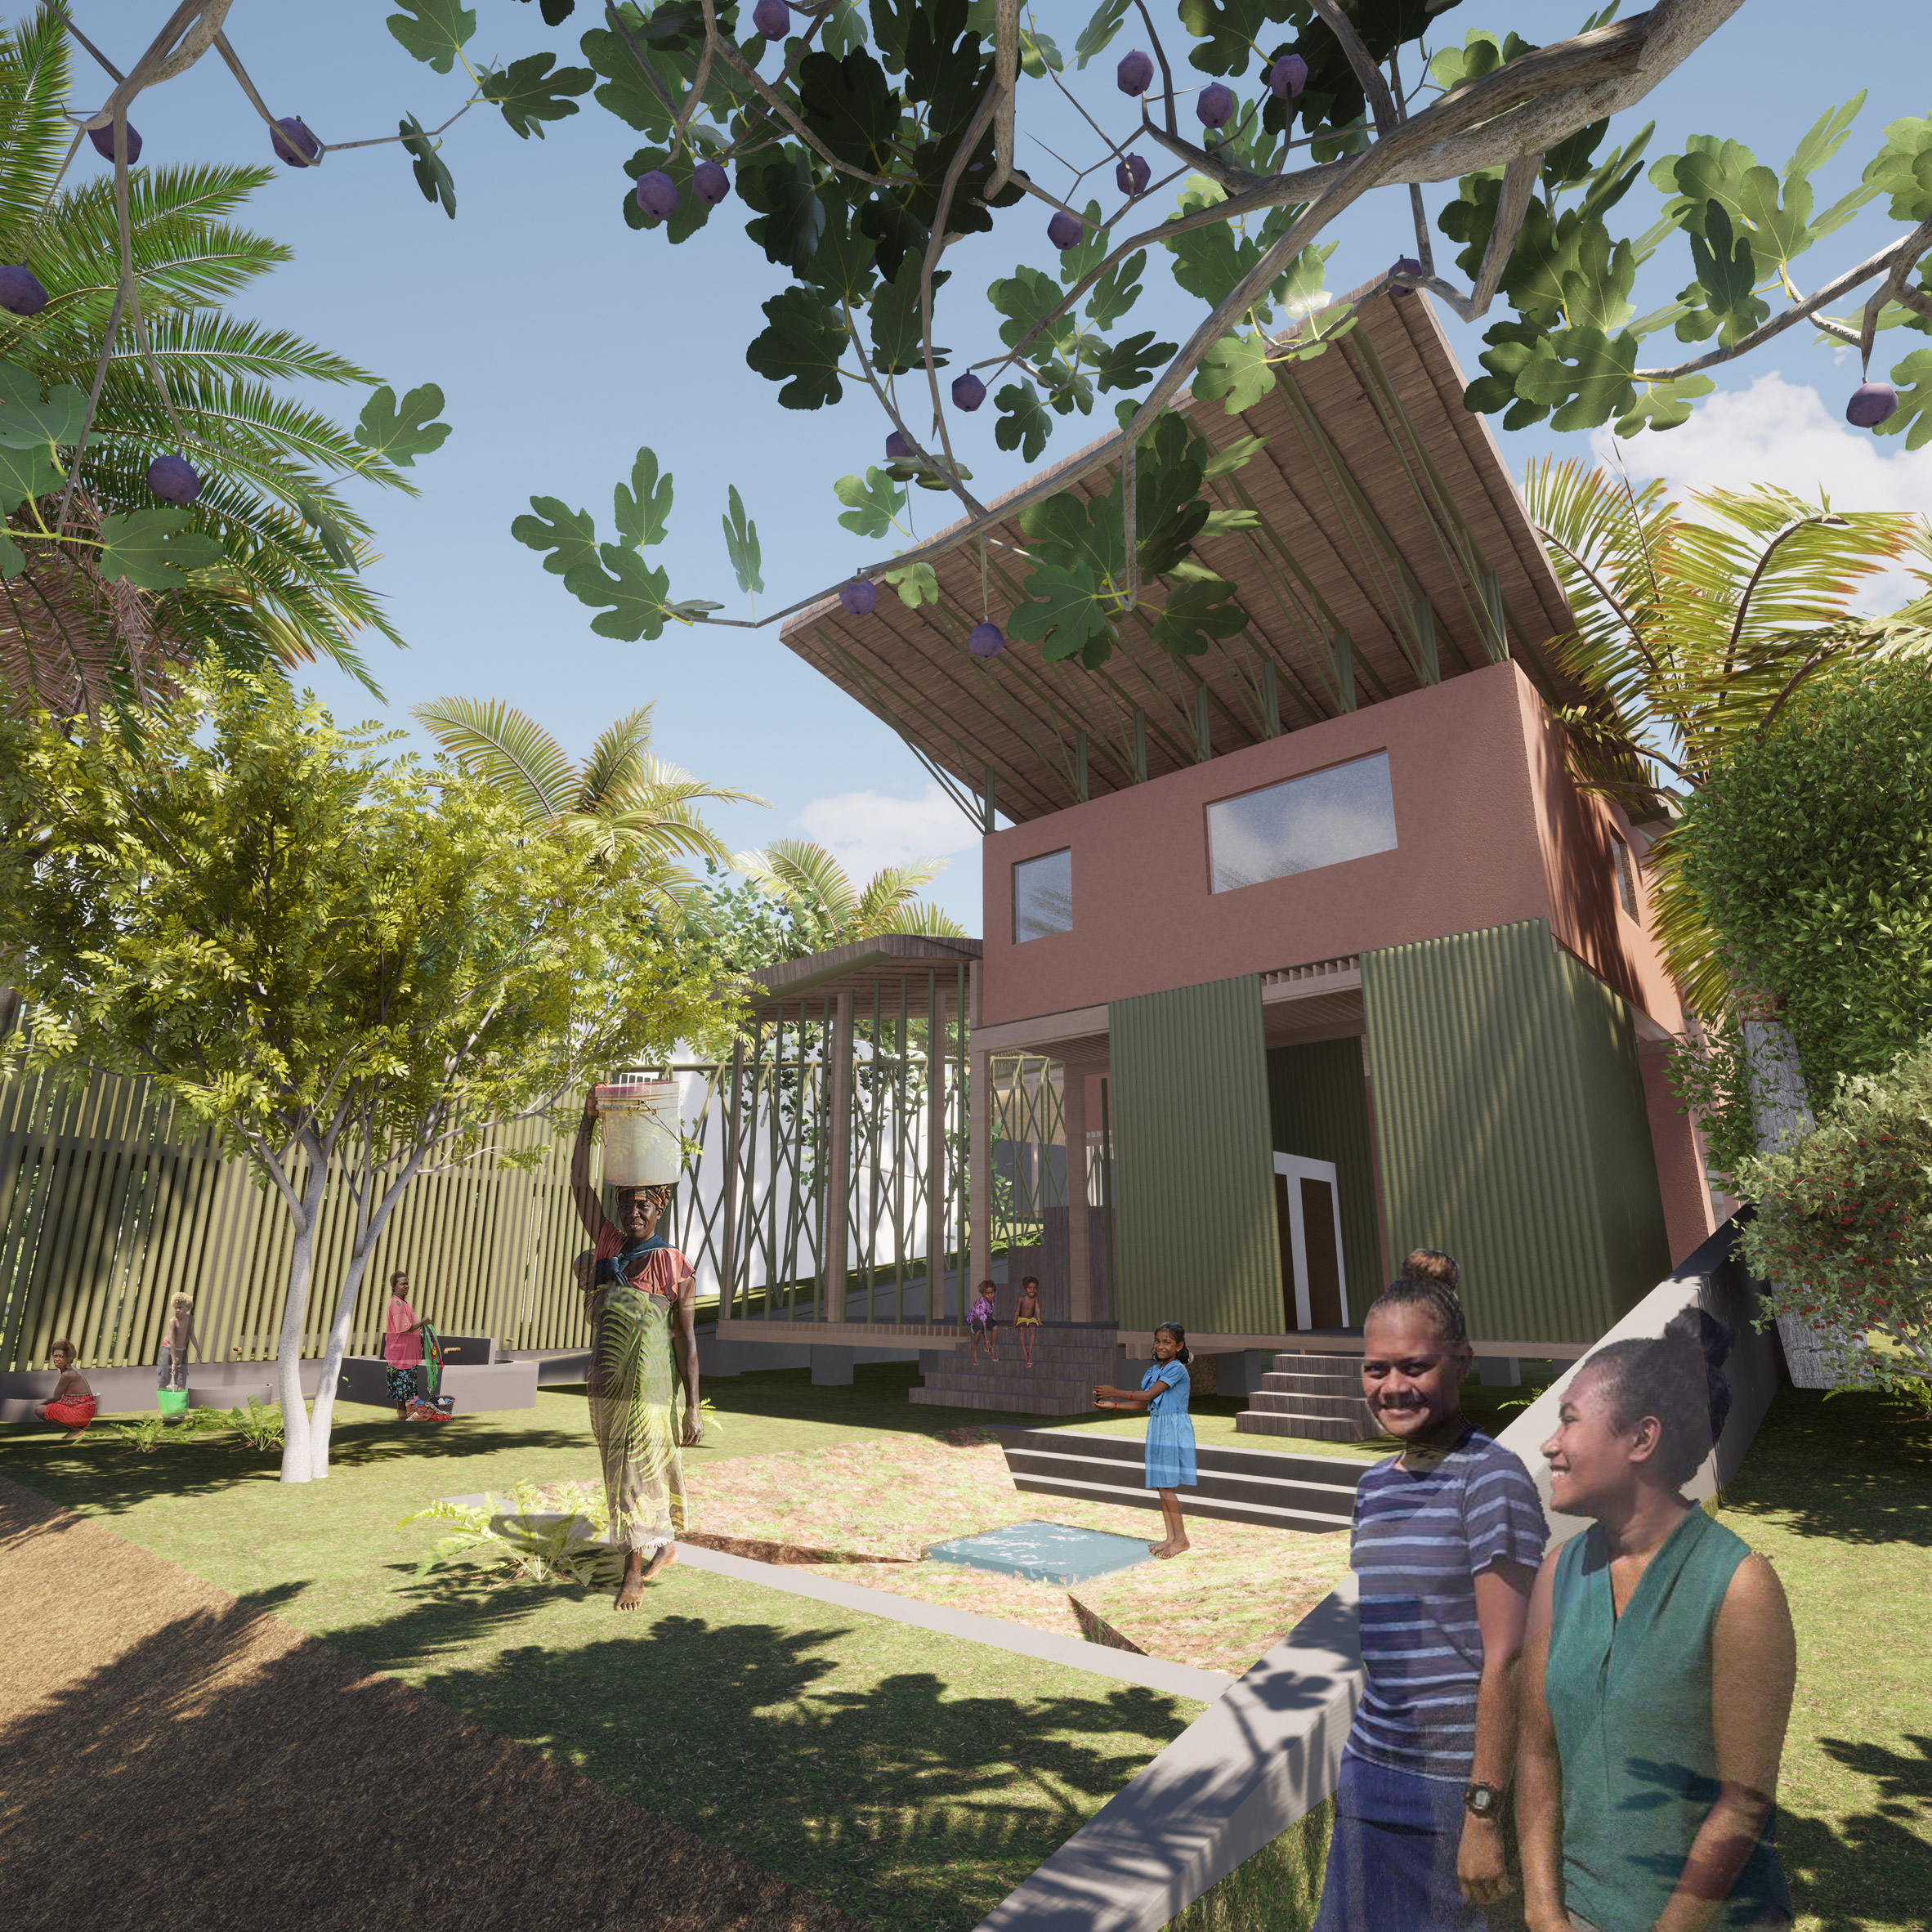 A visualisation of Lombi Women's Home by Alex Casar-Rodriquez and Sara Chafi